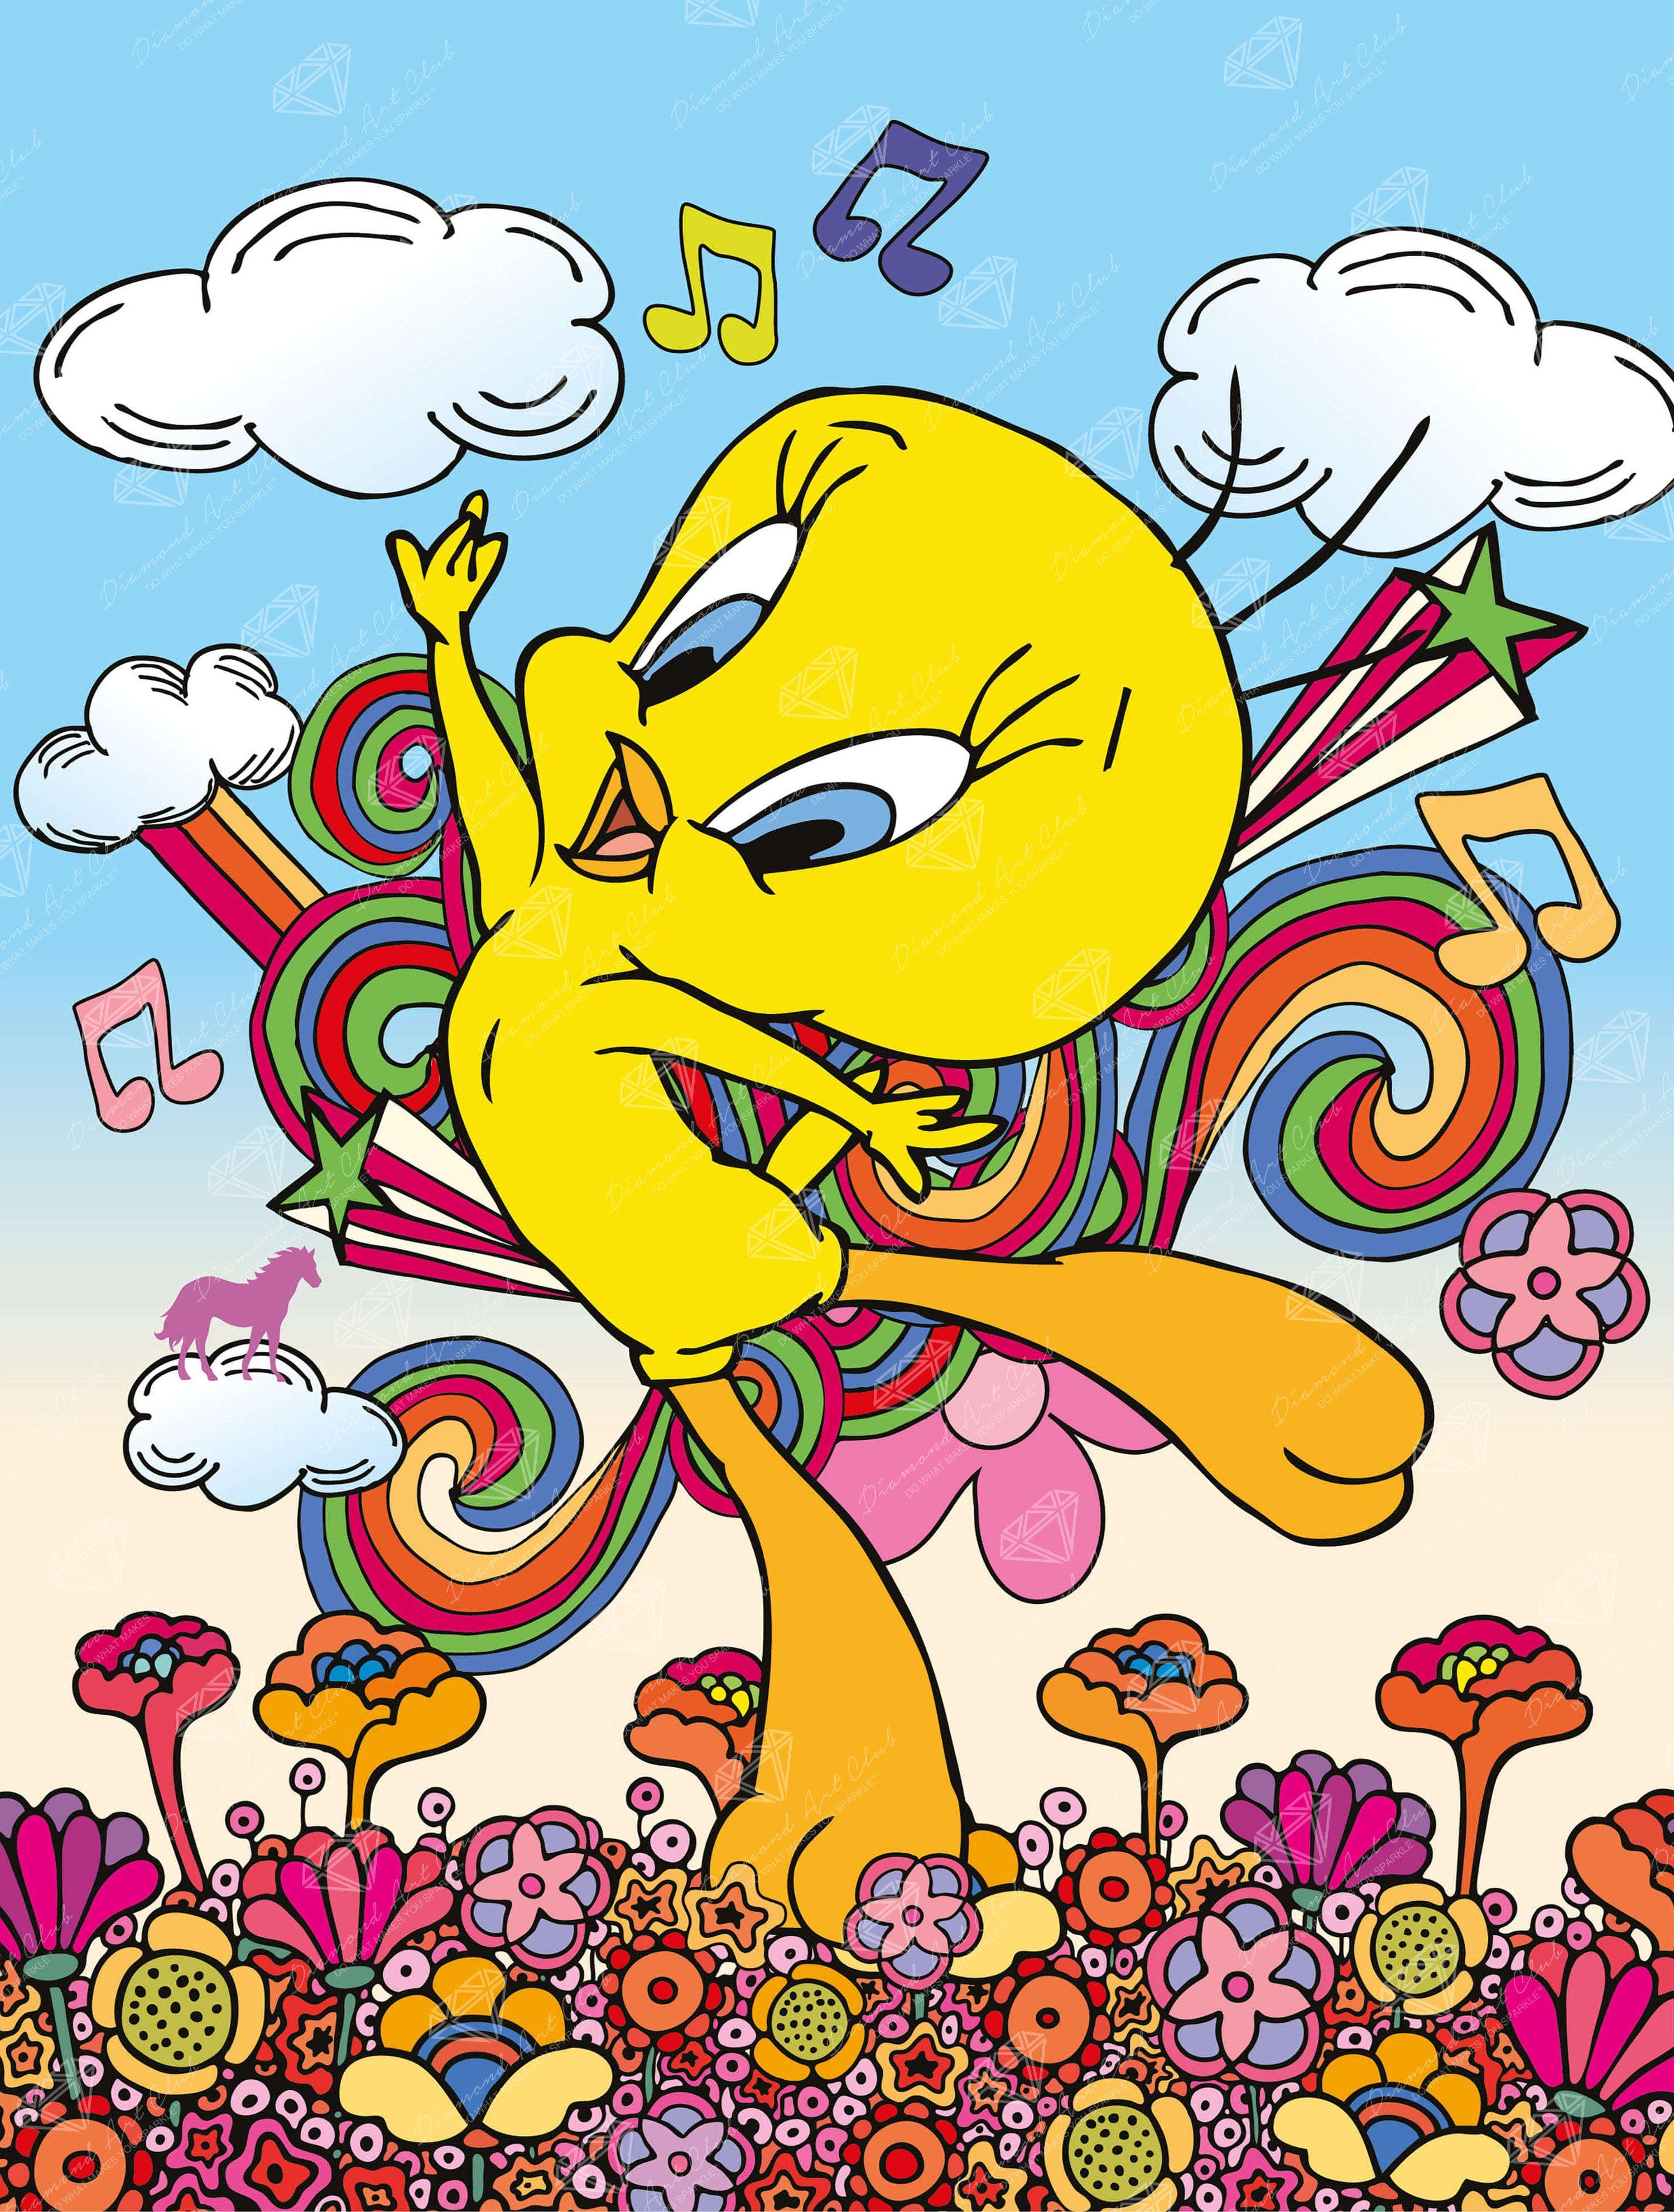 Tweety Bird™ — 13 x 15 (32.8cm x 37.8cm) / Round With 9 Colors Including  1 ABs and 1 Fairy Dust Diamonds / 15,795